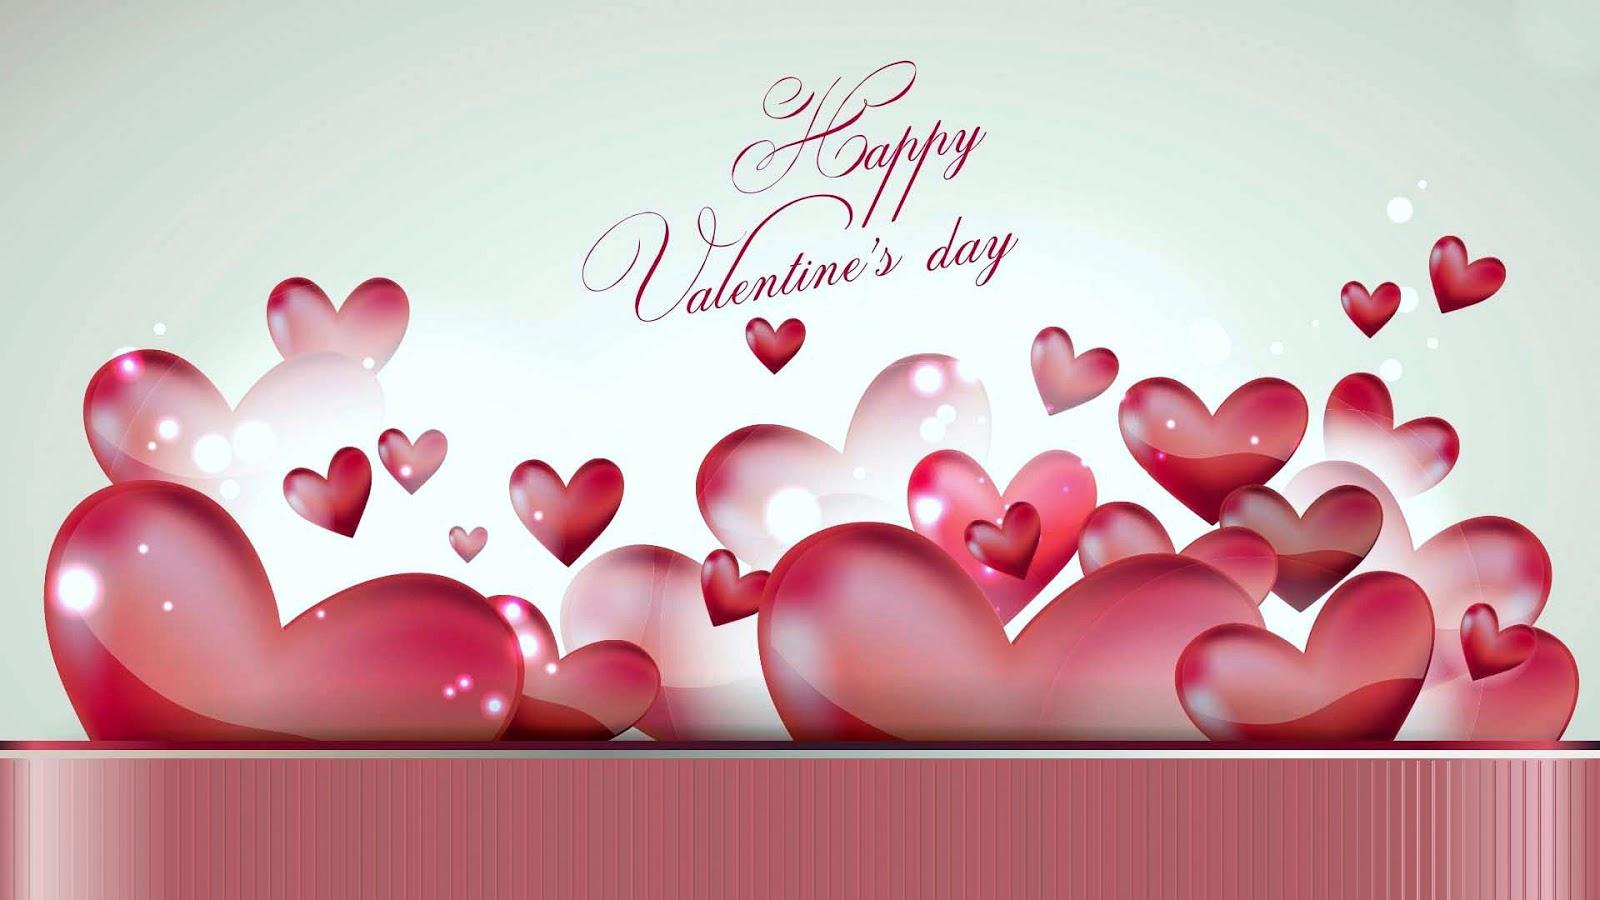 14th February 2023 Valentine's Day Wishing Cards Image Pics